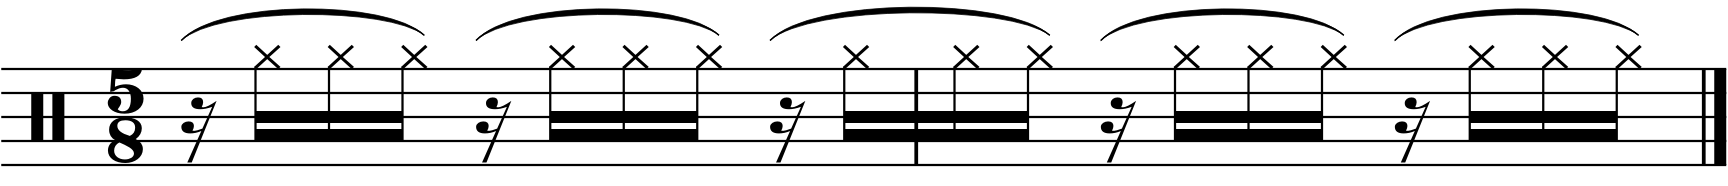 The base rhythm for these grooves